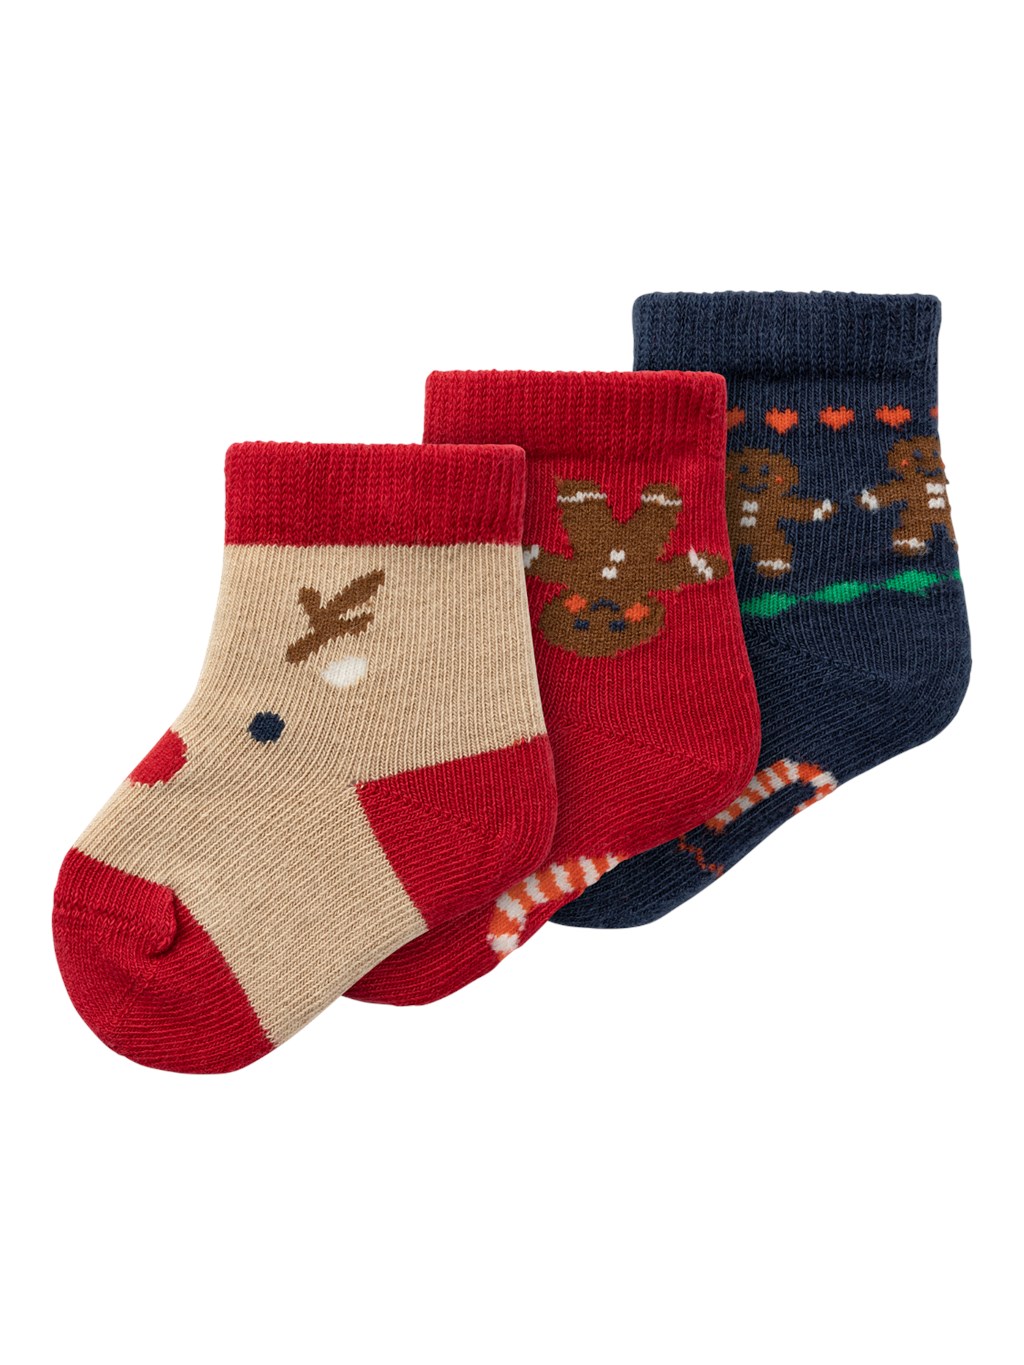 #3 - Name it Jester Red Richristmas Socks 3-pack